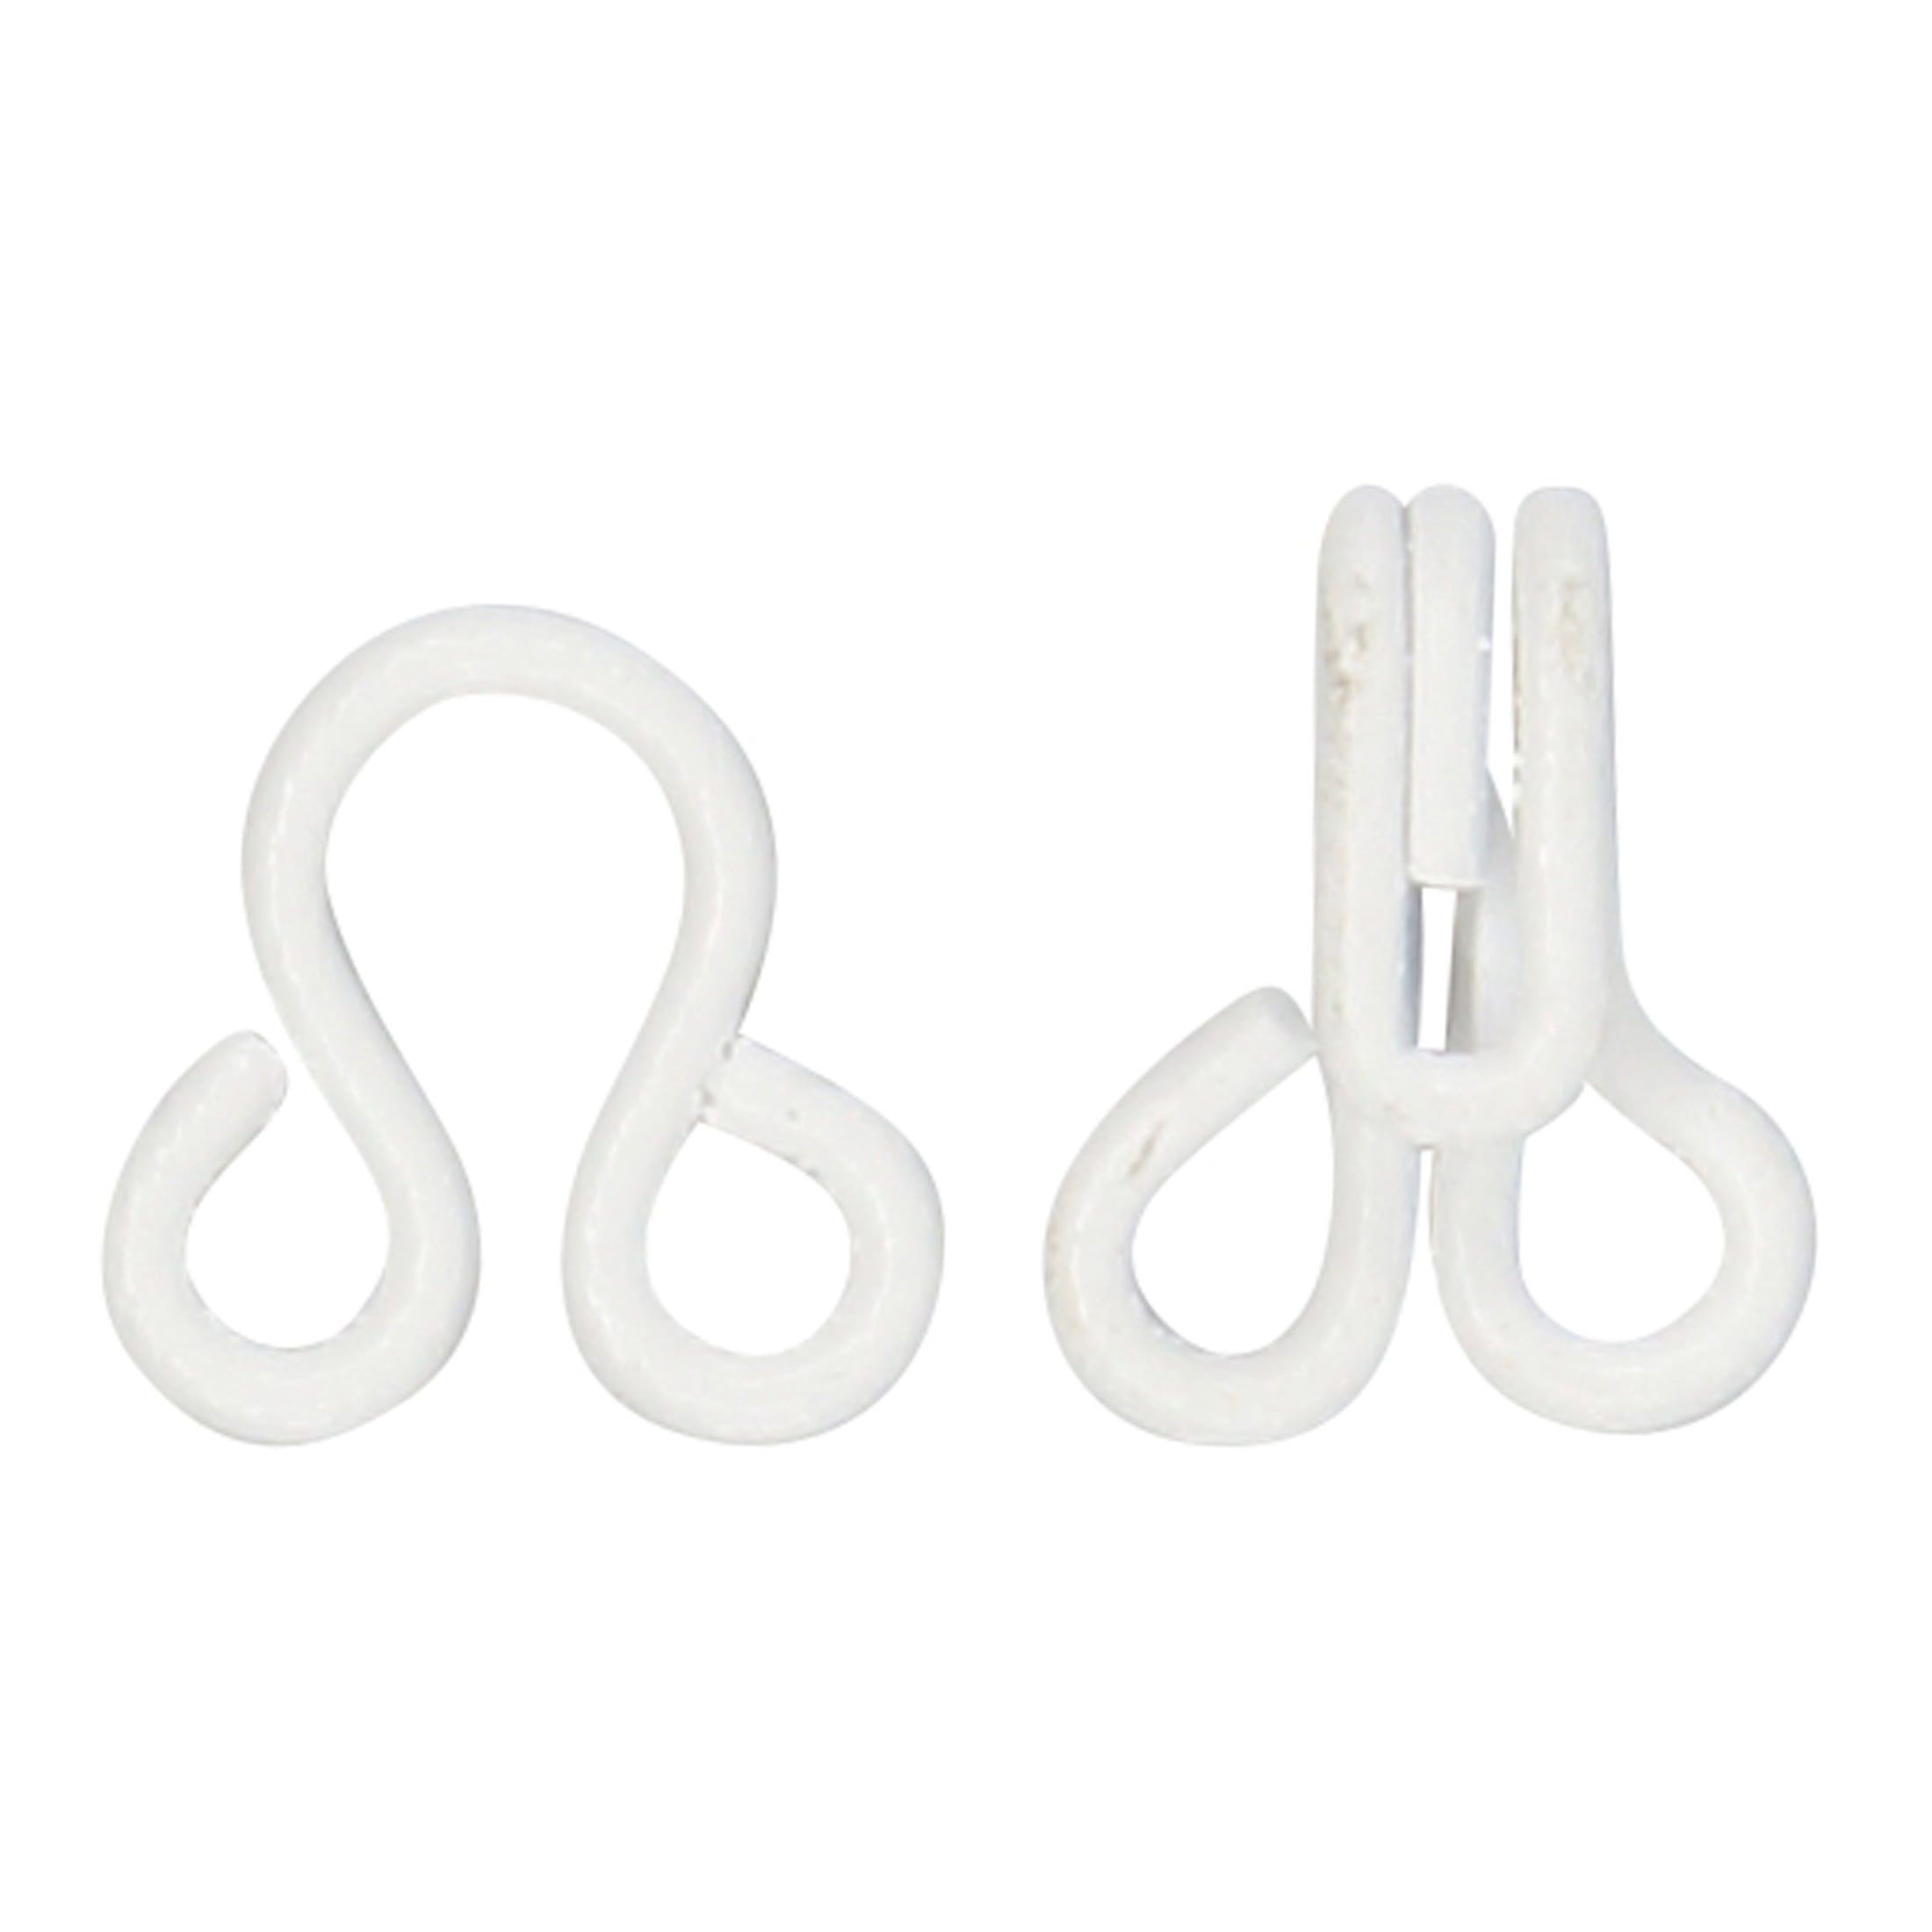 Brewer Sewing - Hooks & Eyes White 20ct. sizes 1 & 2